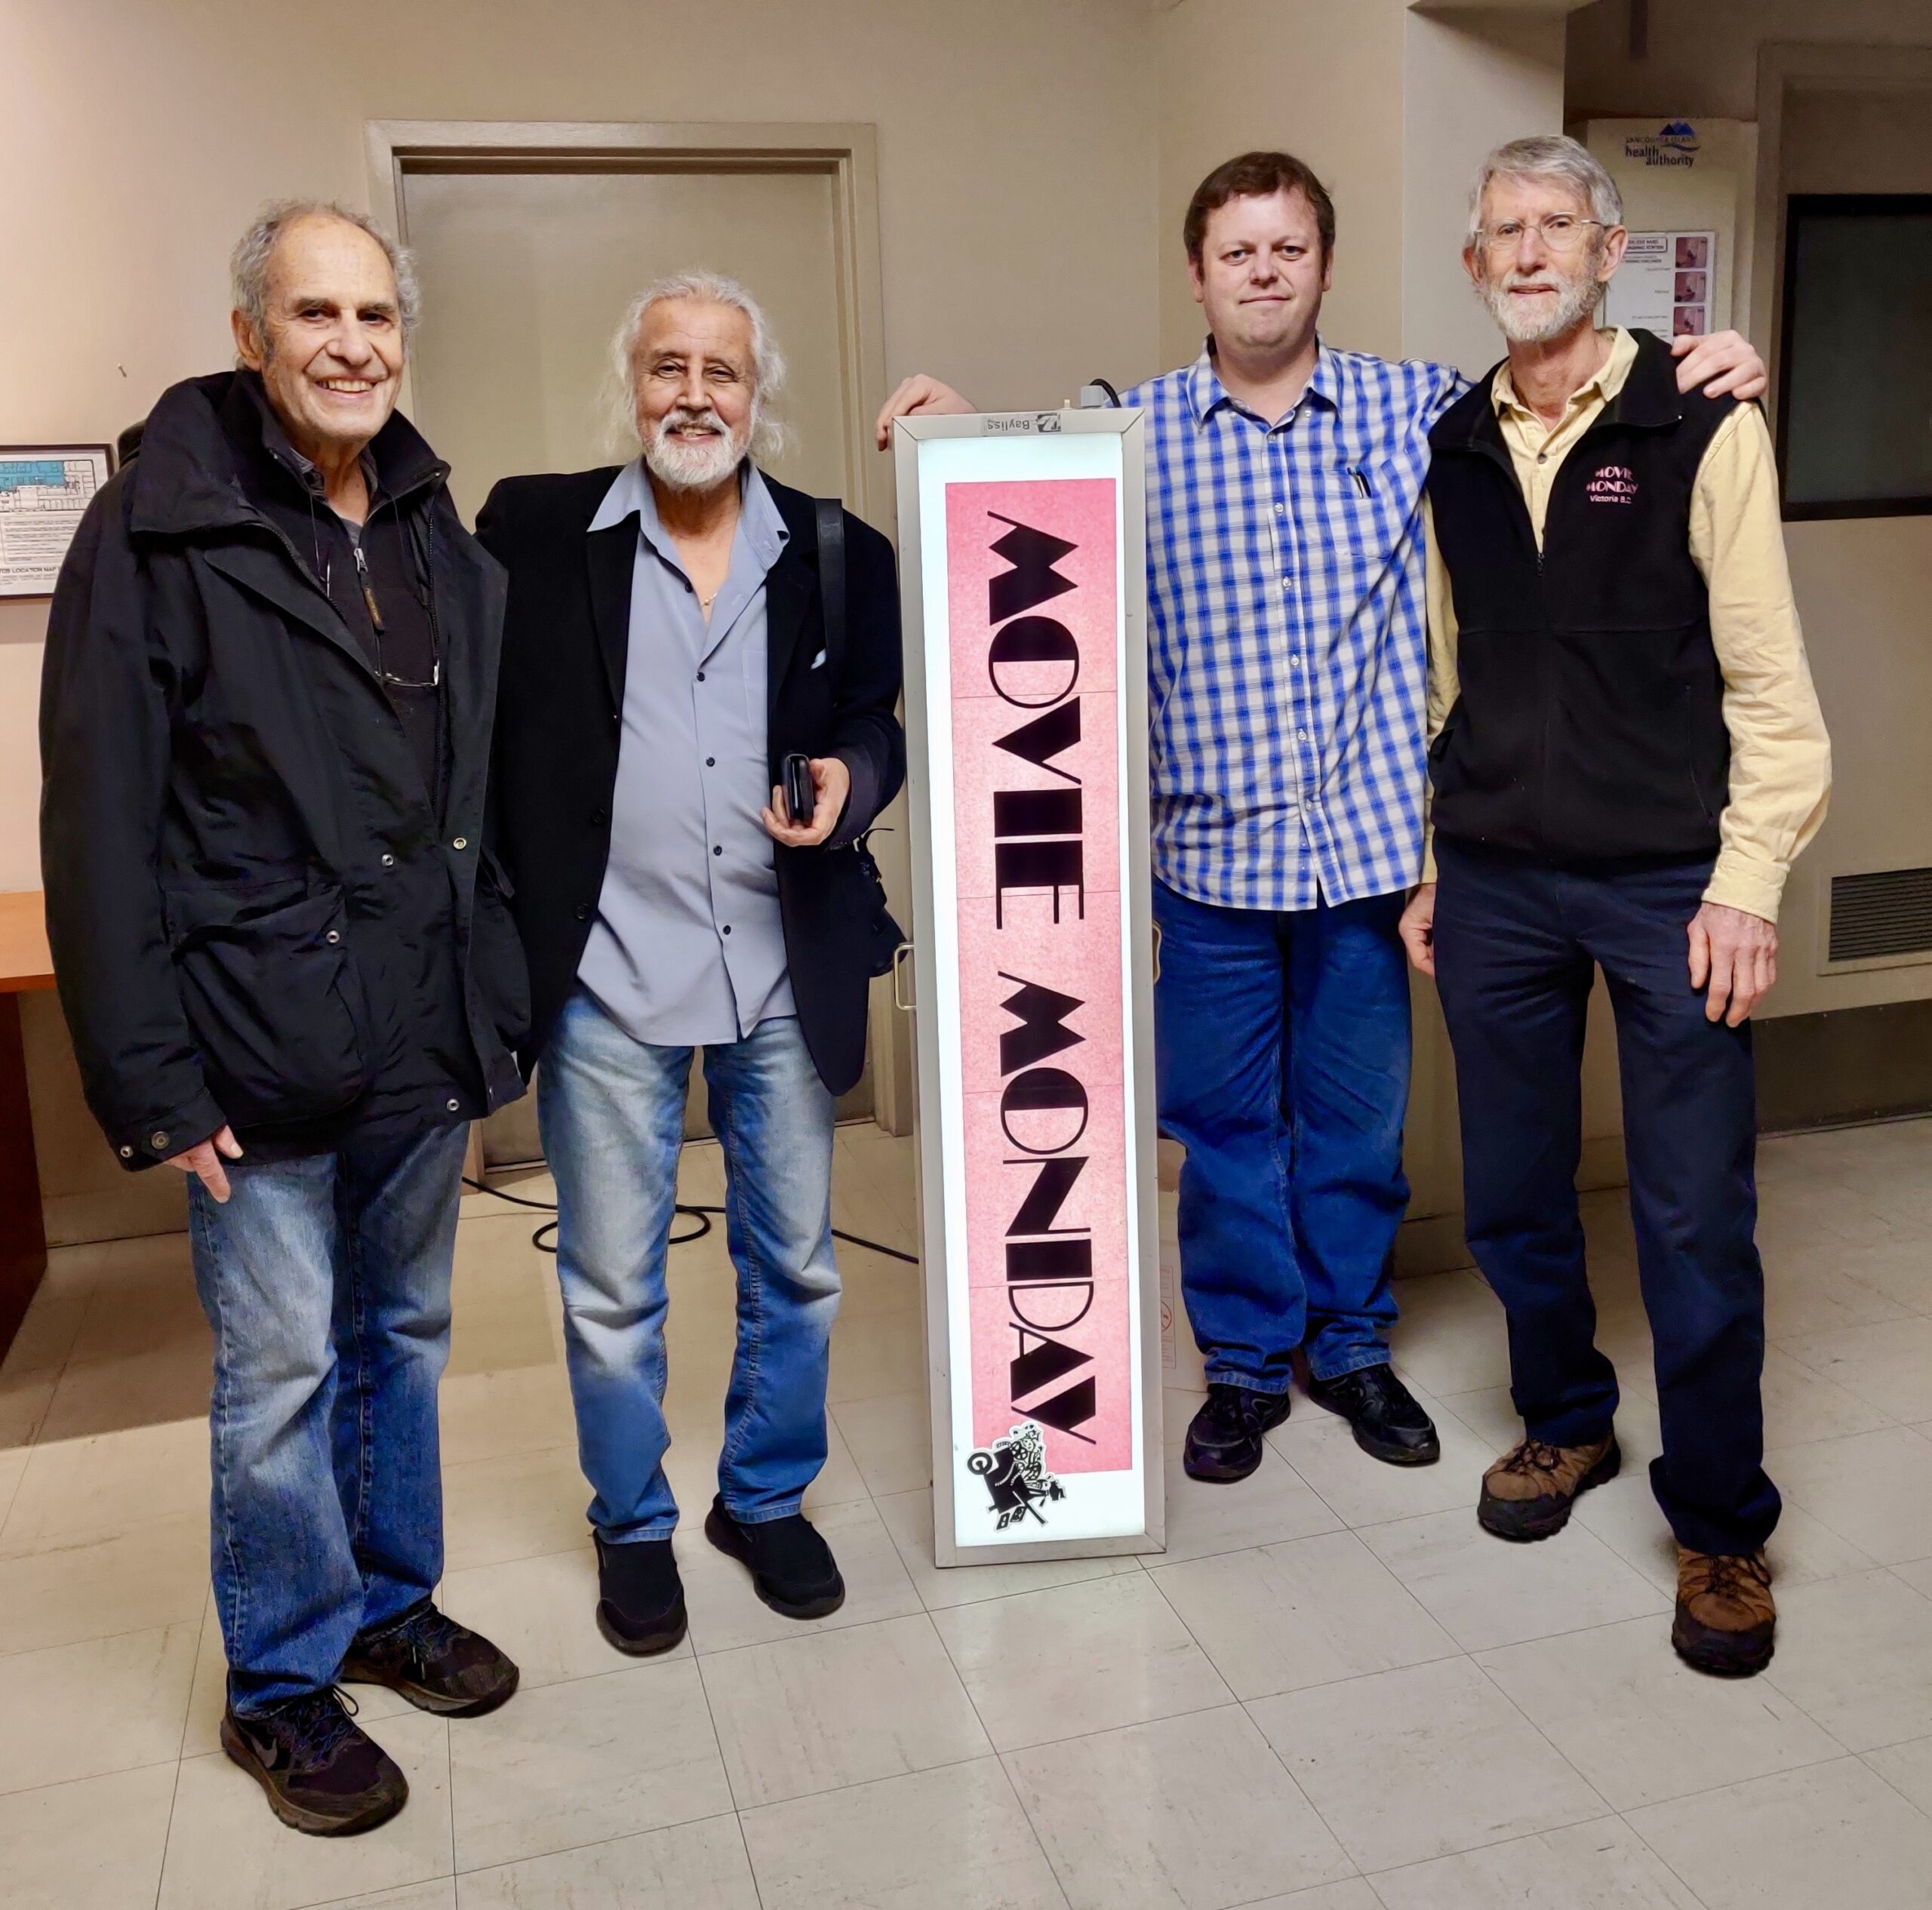 Jan 2020 Mort Ransen, Vic Sarin, MM crew Jason Whyte, and Bruce at cinematographer Sarin’s presentation of his film about cinematographers, “Keepers of the Magic”. Ransen (director) and Sarin worked together on the Canadian classic “Margaret’s Museum” (1995)